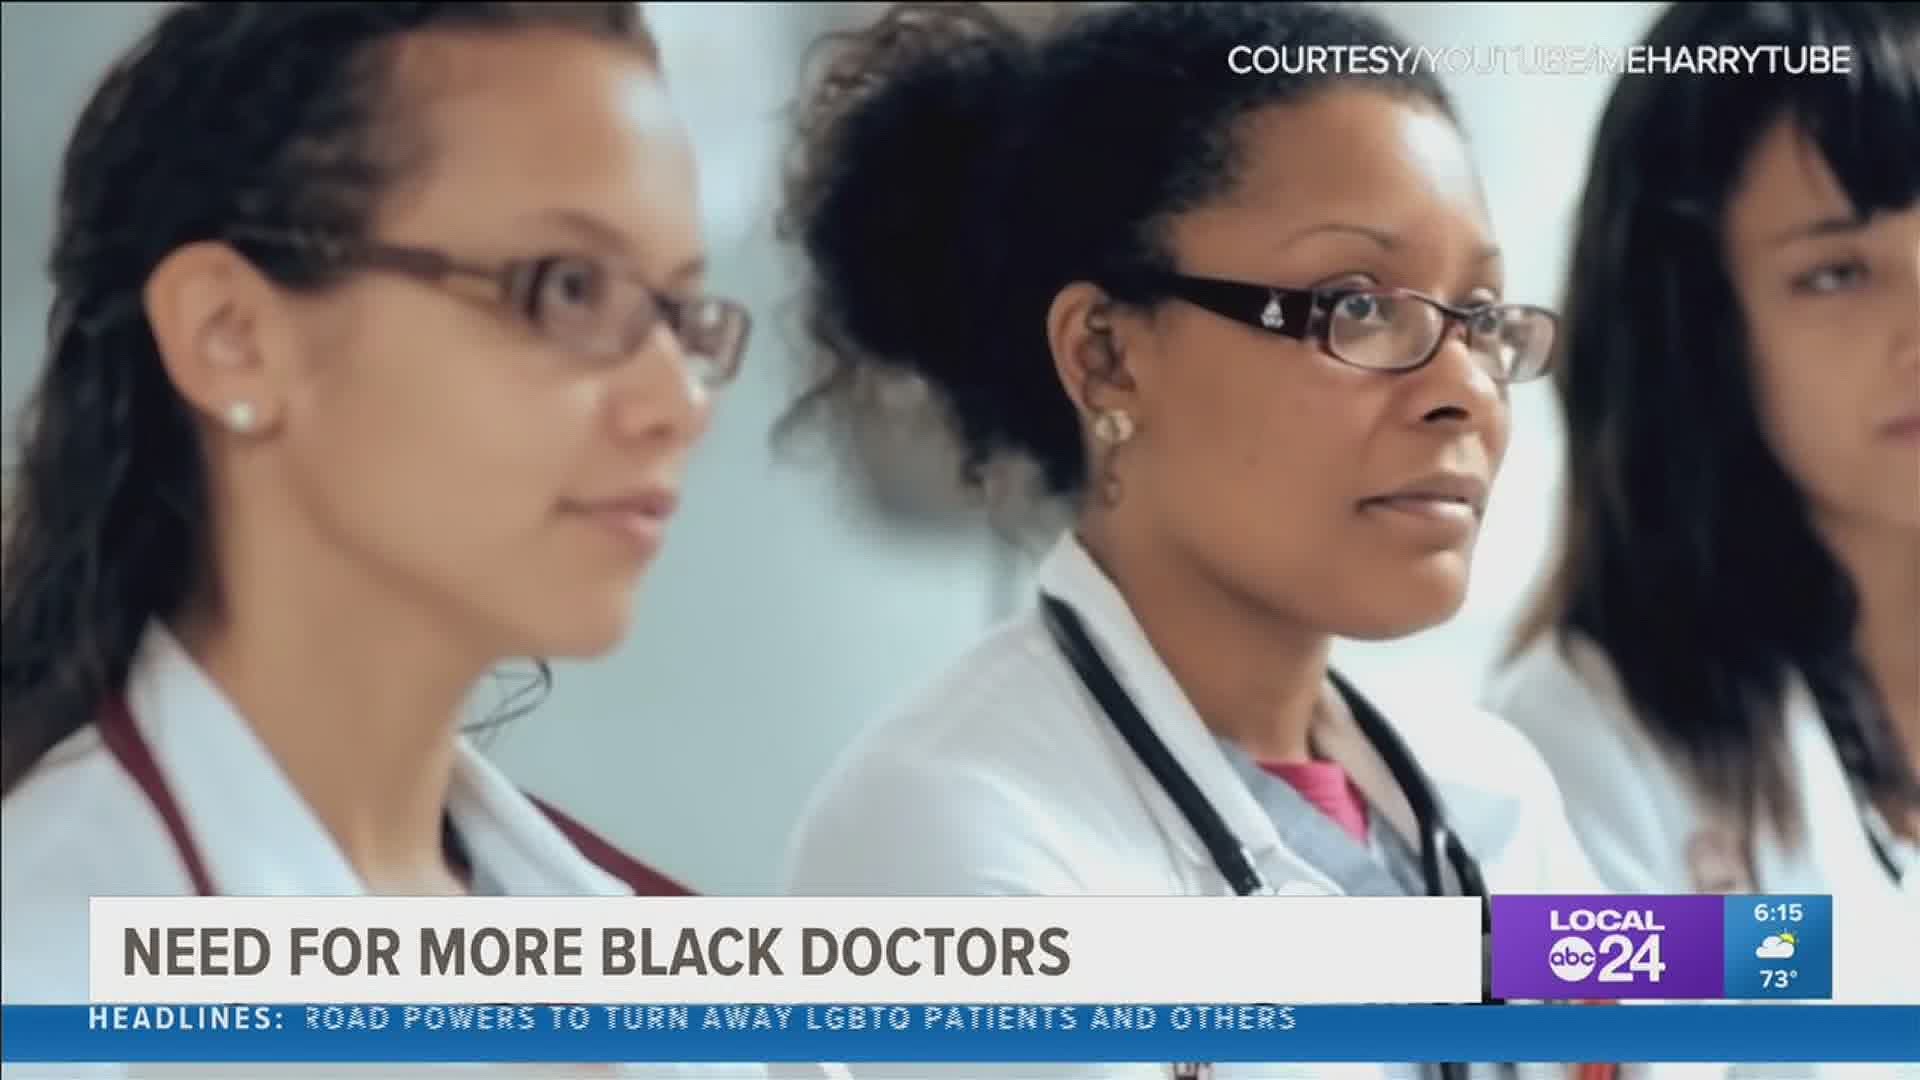 Two colleges have joined forces to offer free scholarships to African American students that want to become doctors and dentists.